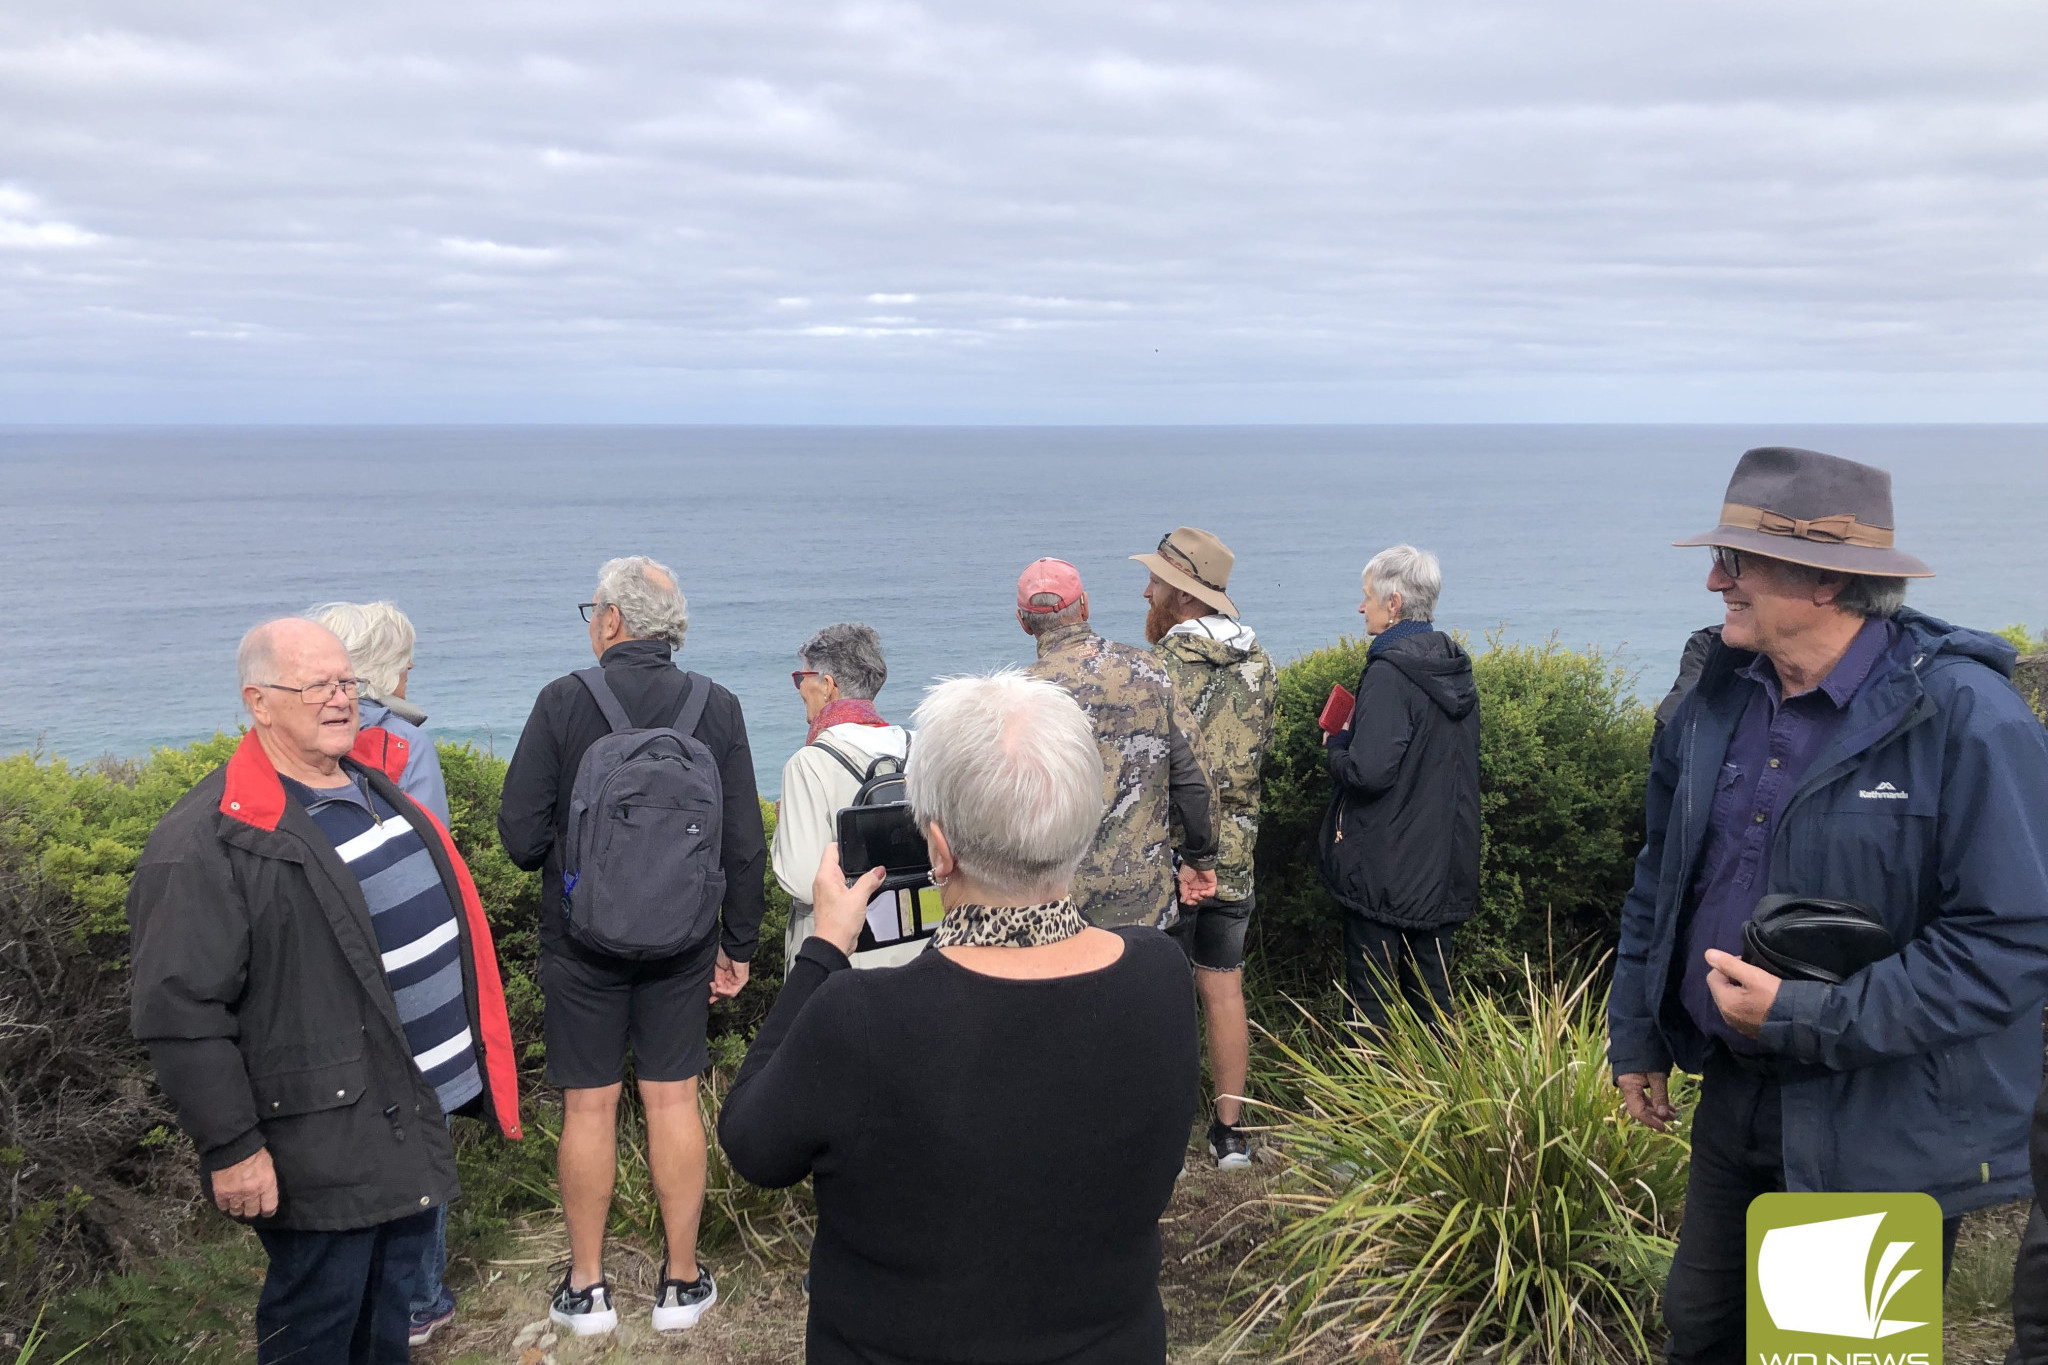 Memorial: Twenty five people – some from as far away as New Zealand – attended a special tribute at the wreck site of the Fiji which struck trouble in 1891.